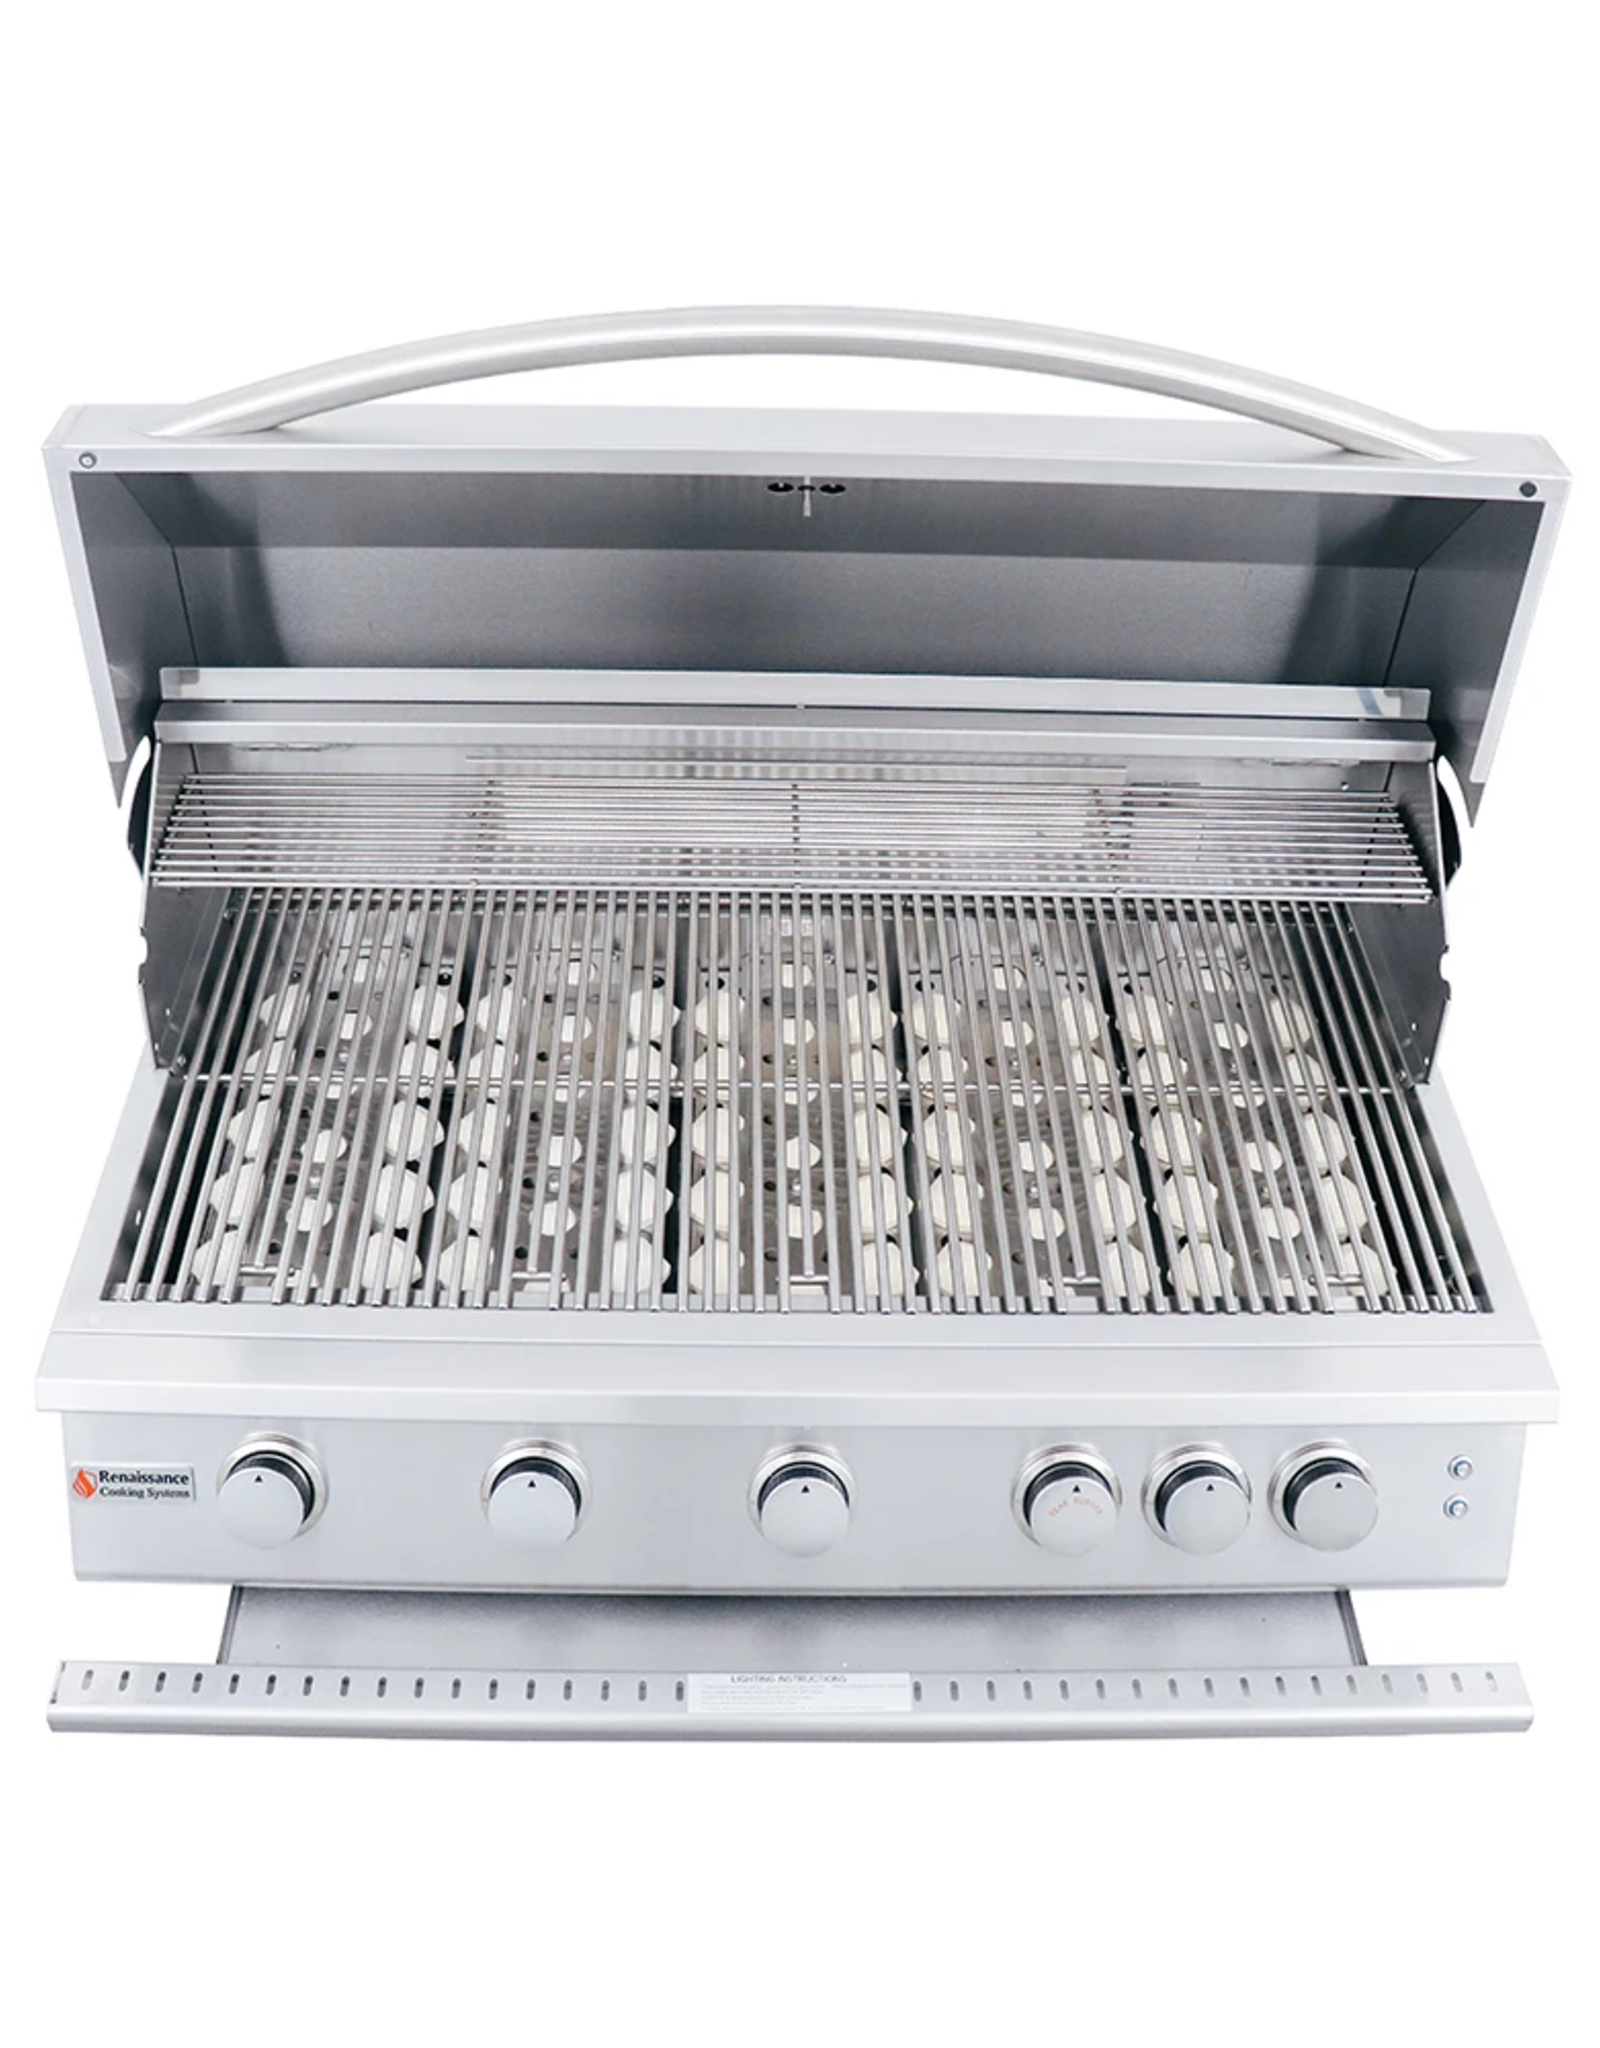 Renaissance Cooking Systems Renaissance Cooking Systems 40" Premier Drop-In Grill w/ LED Lights Natural Gas  - RJC40AL